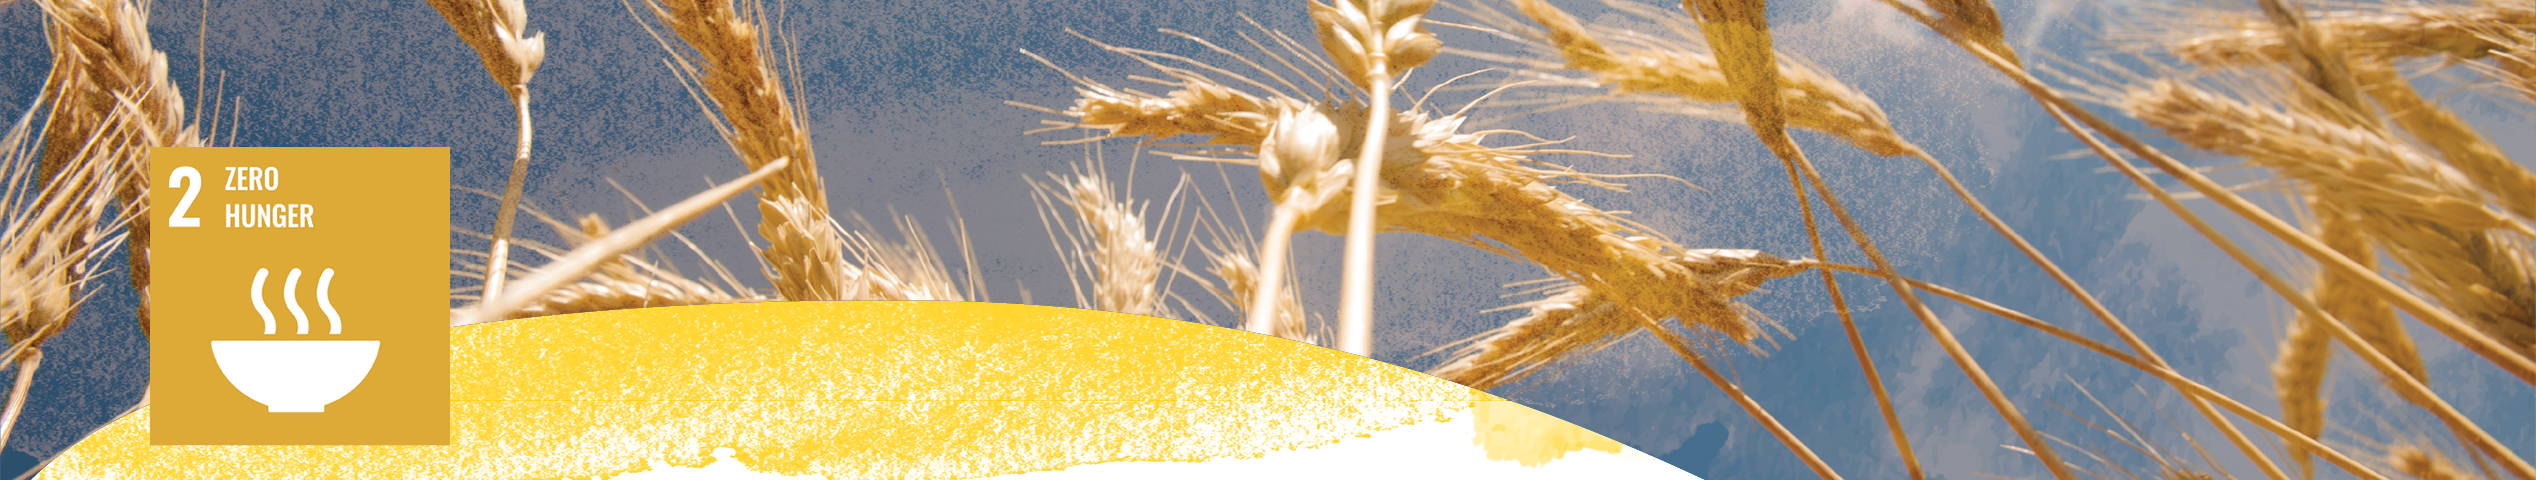 SDG 2: No Hunger with a photo of wheat